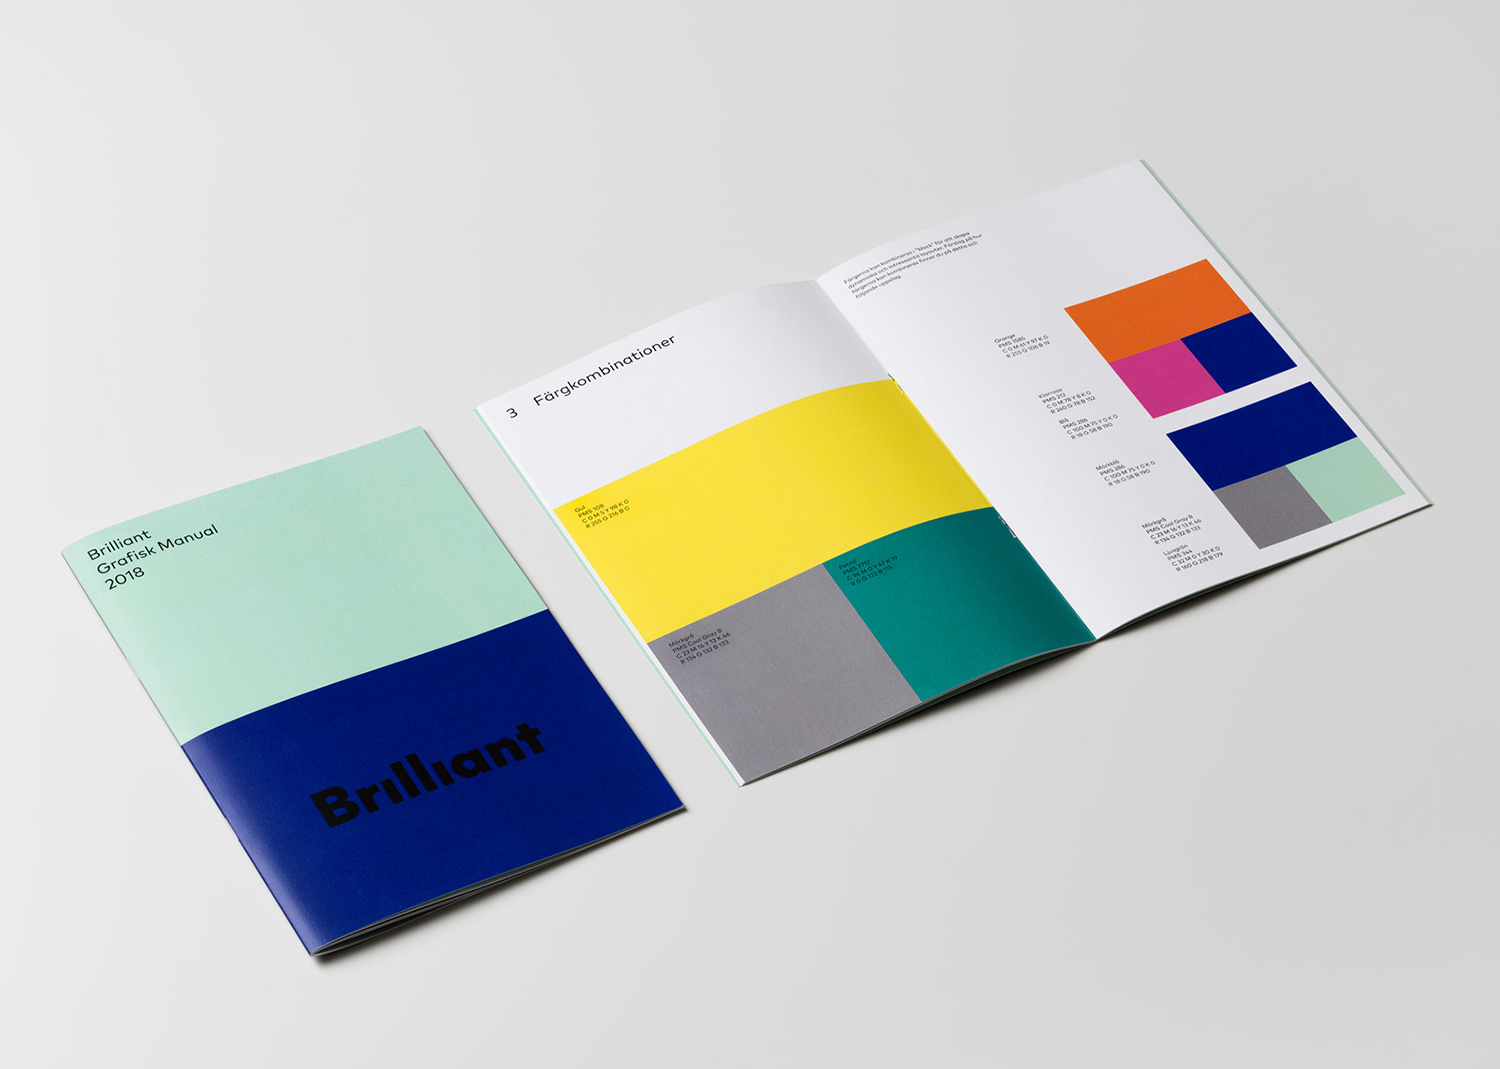 Logotype, pictograms, stationery and website by The Studio for Swedish customer survey specialists Brilliant